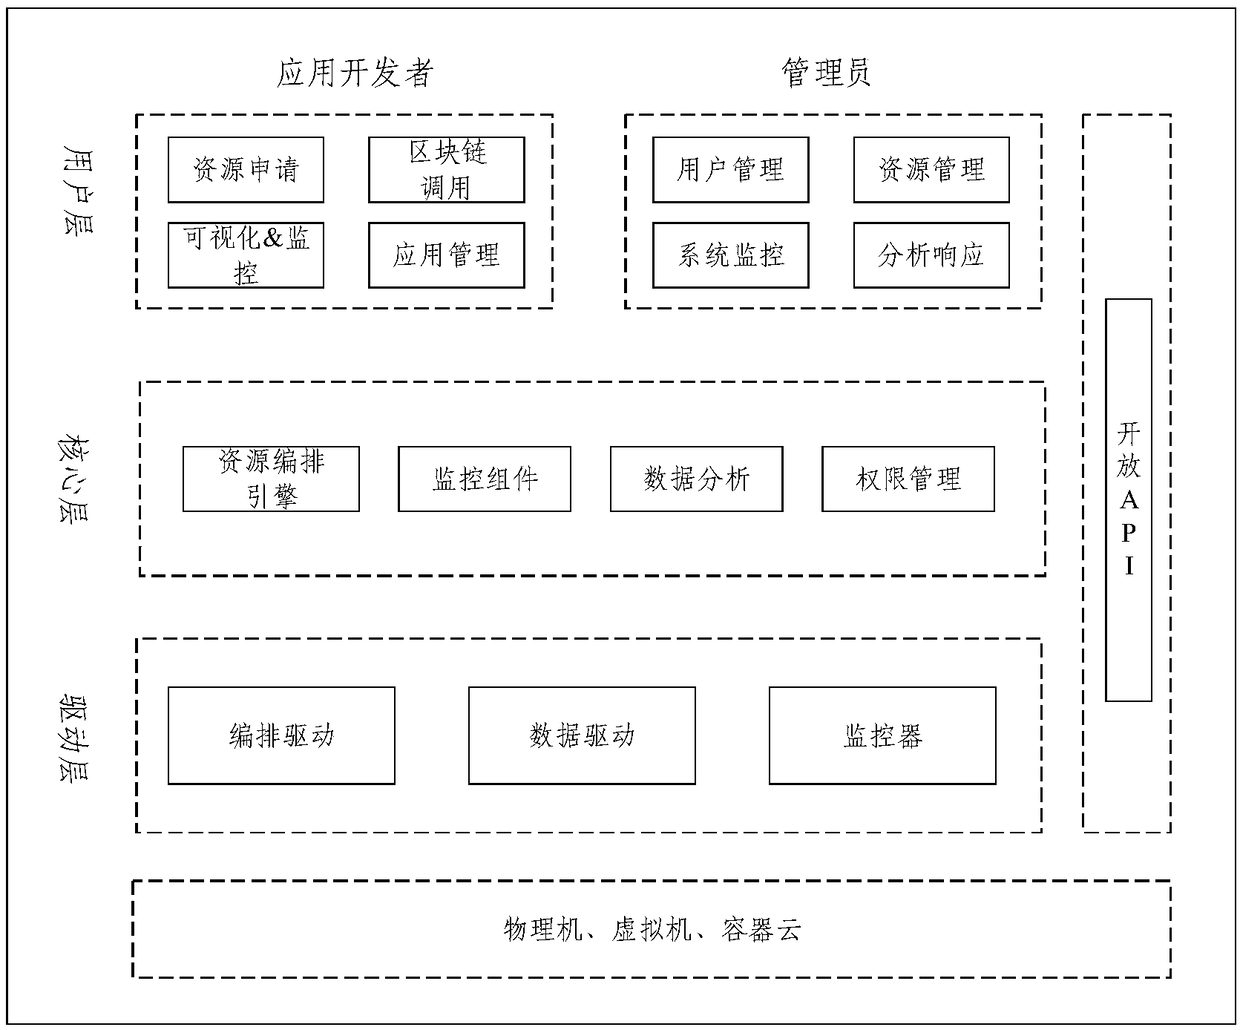 User health data management system and method